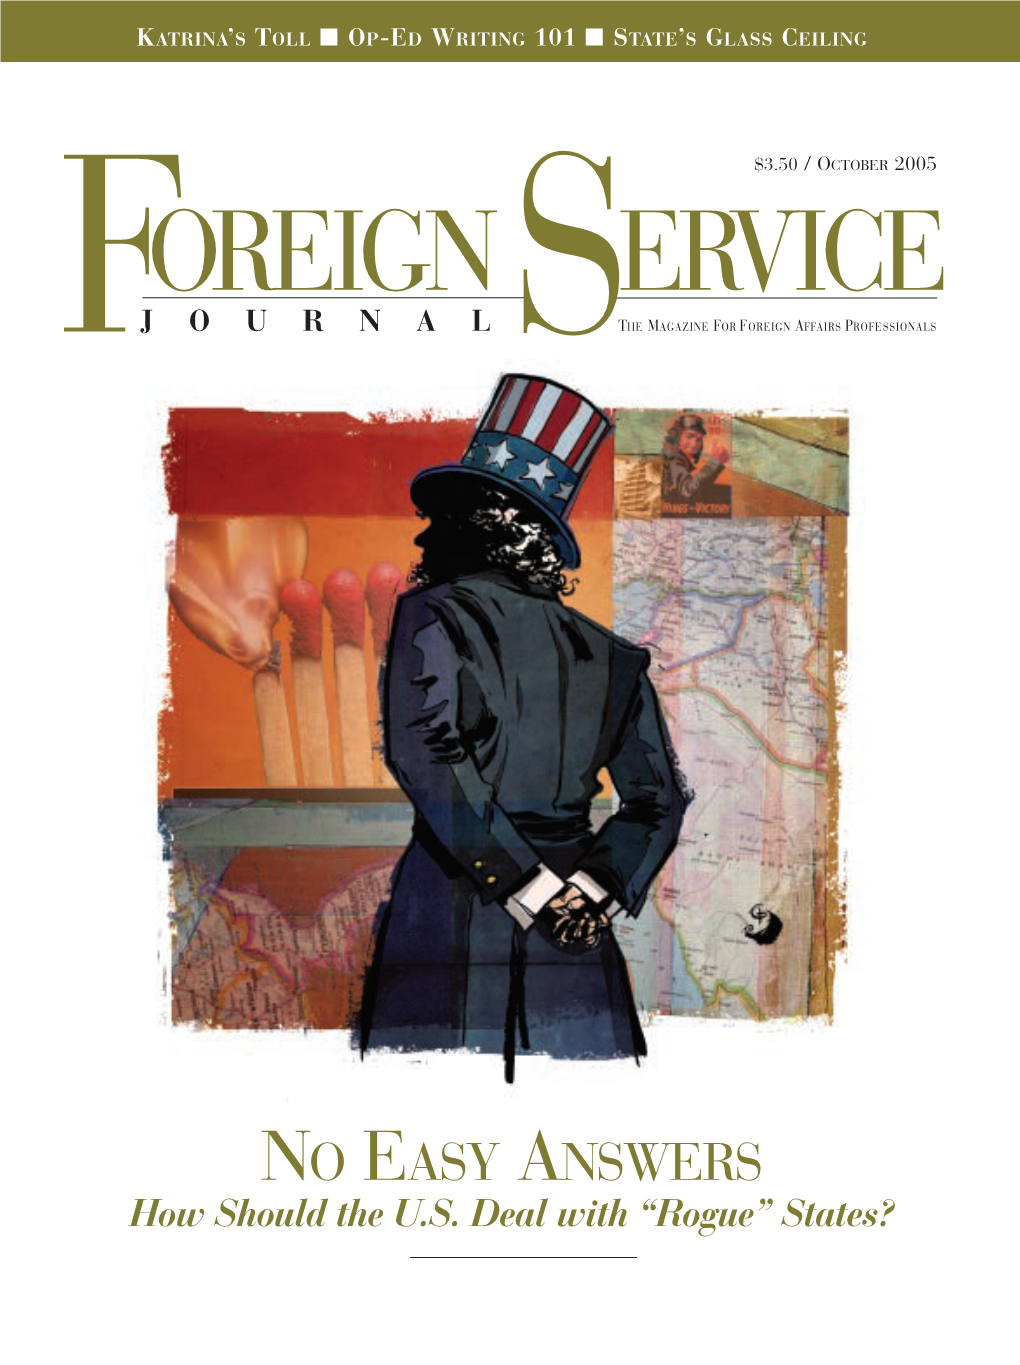 The Foreign Service Journal, October 2005